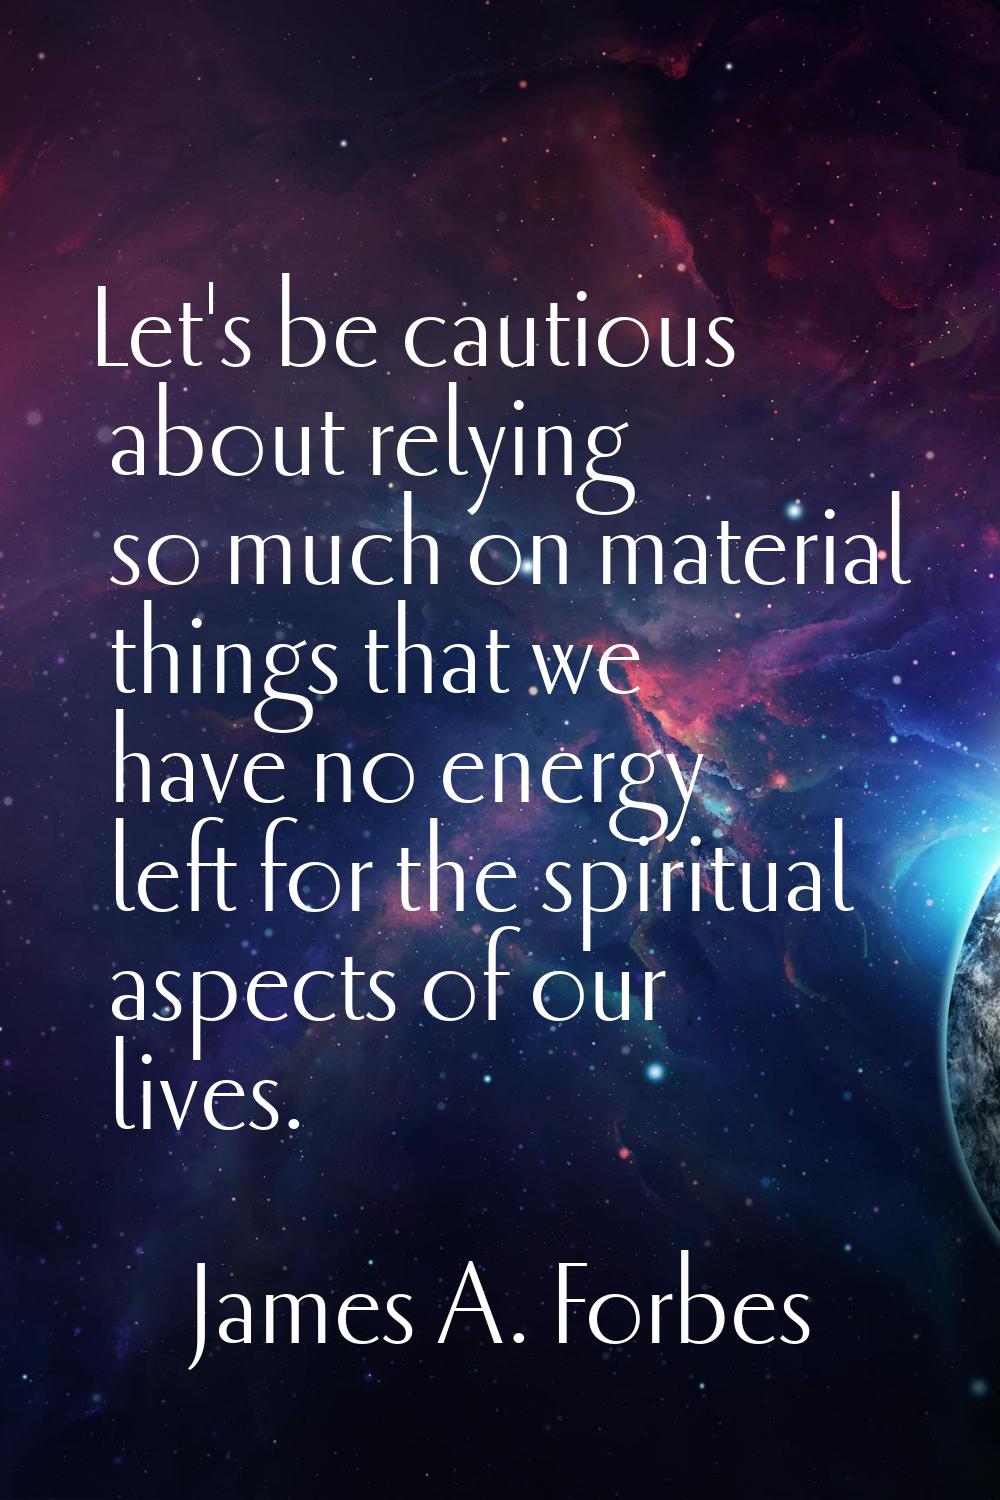 Let's be cautious about relying so much on material things that we have no energy left for the spir